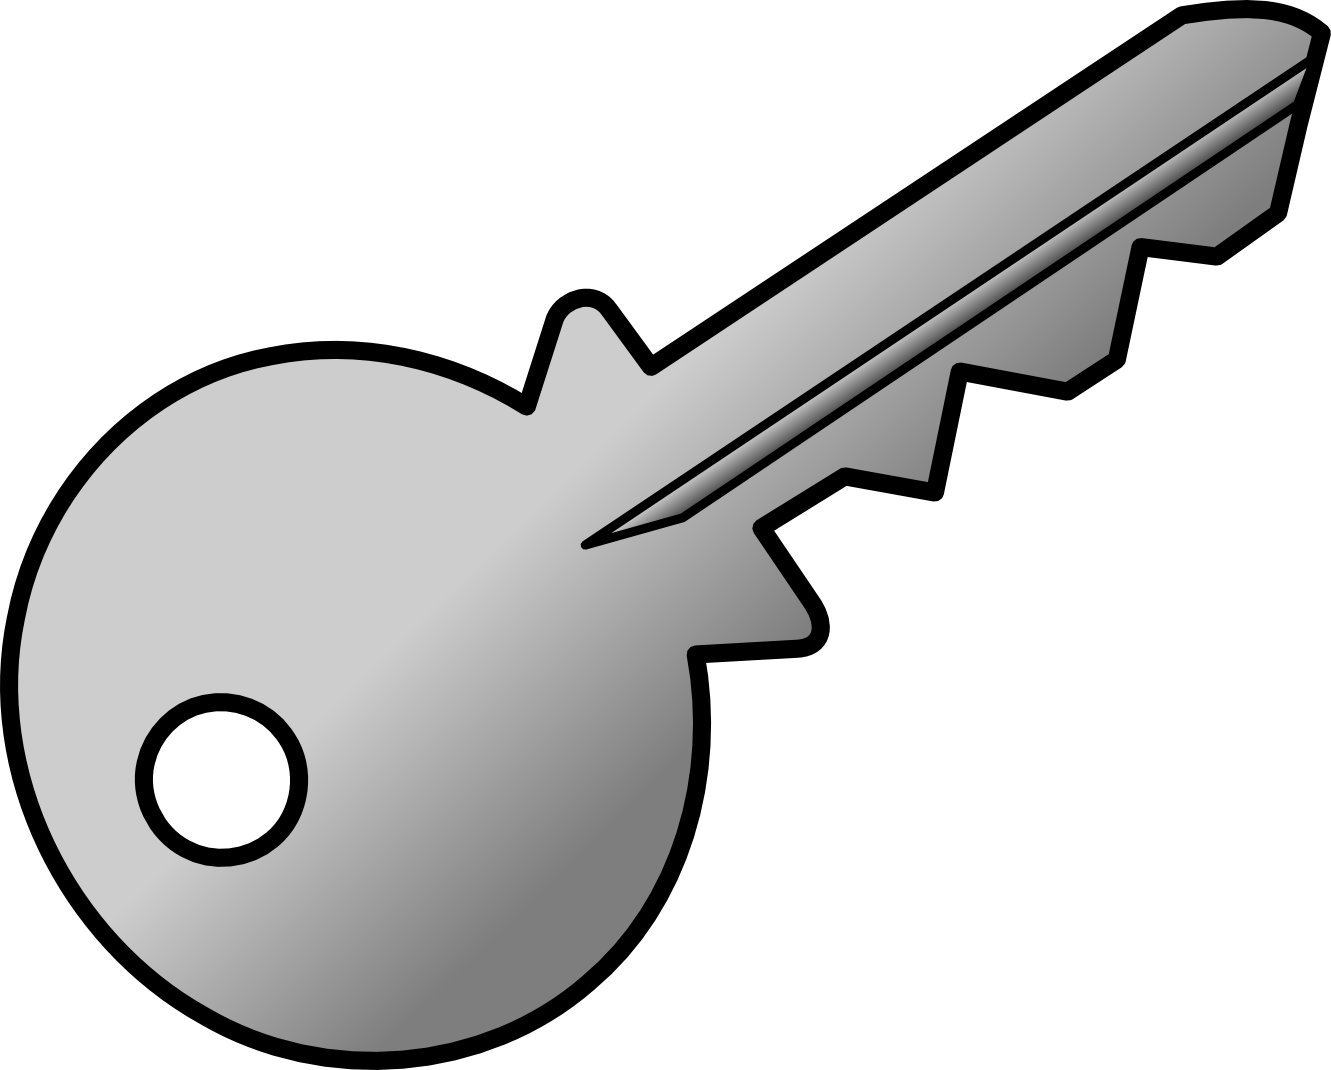 Key clipart icon. Web icons png download